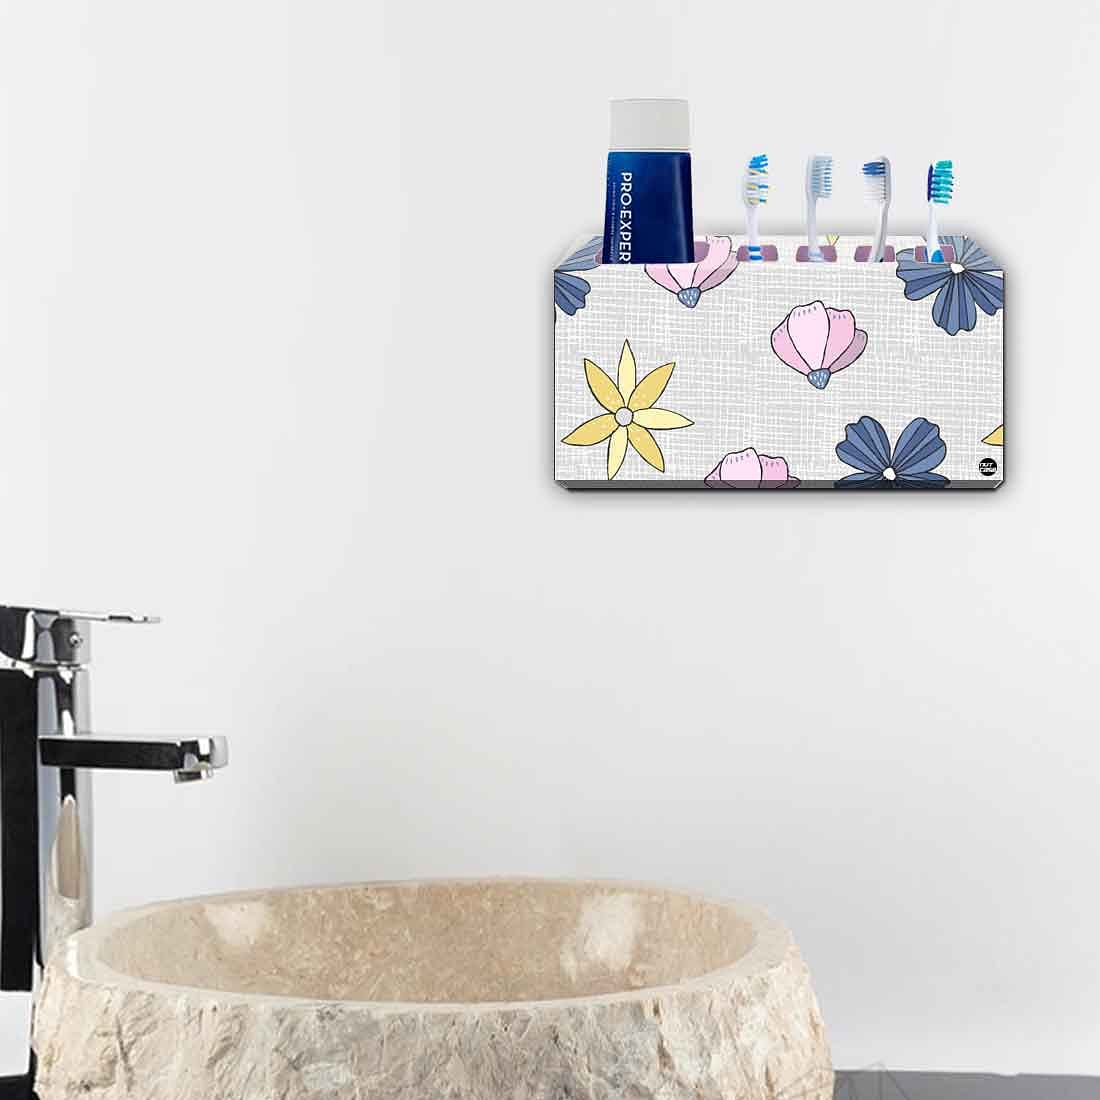 Toothbrush Holder Wall Mounted -Cute Homes Nutcase